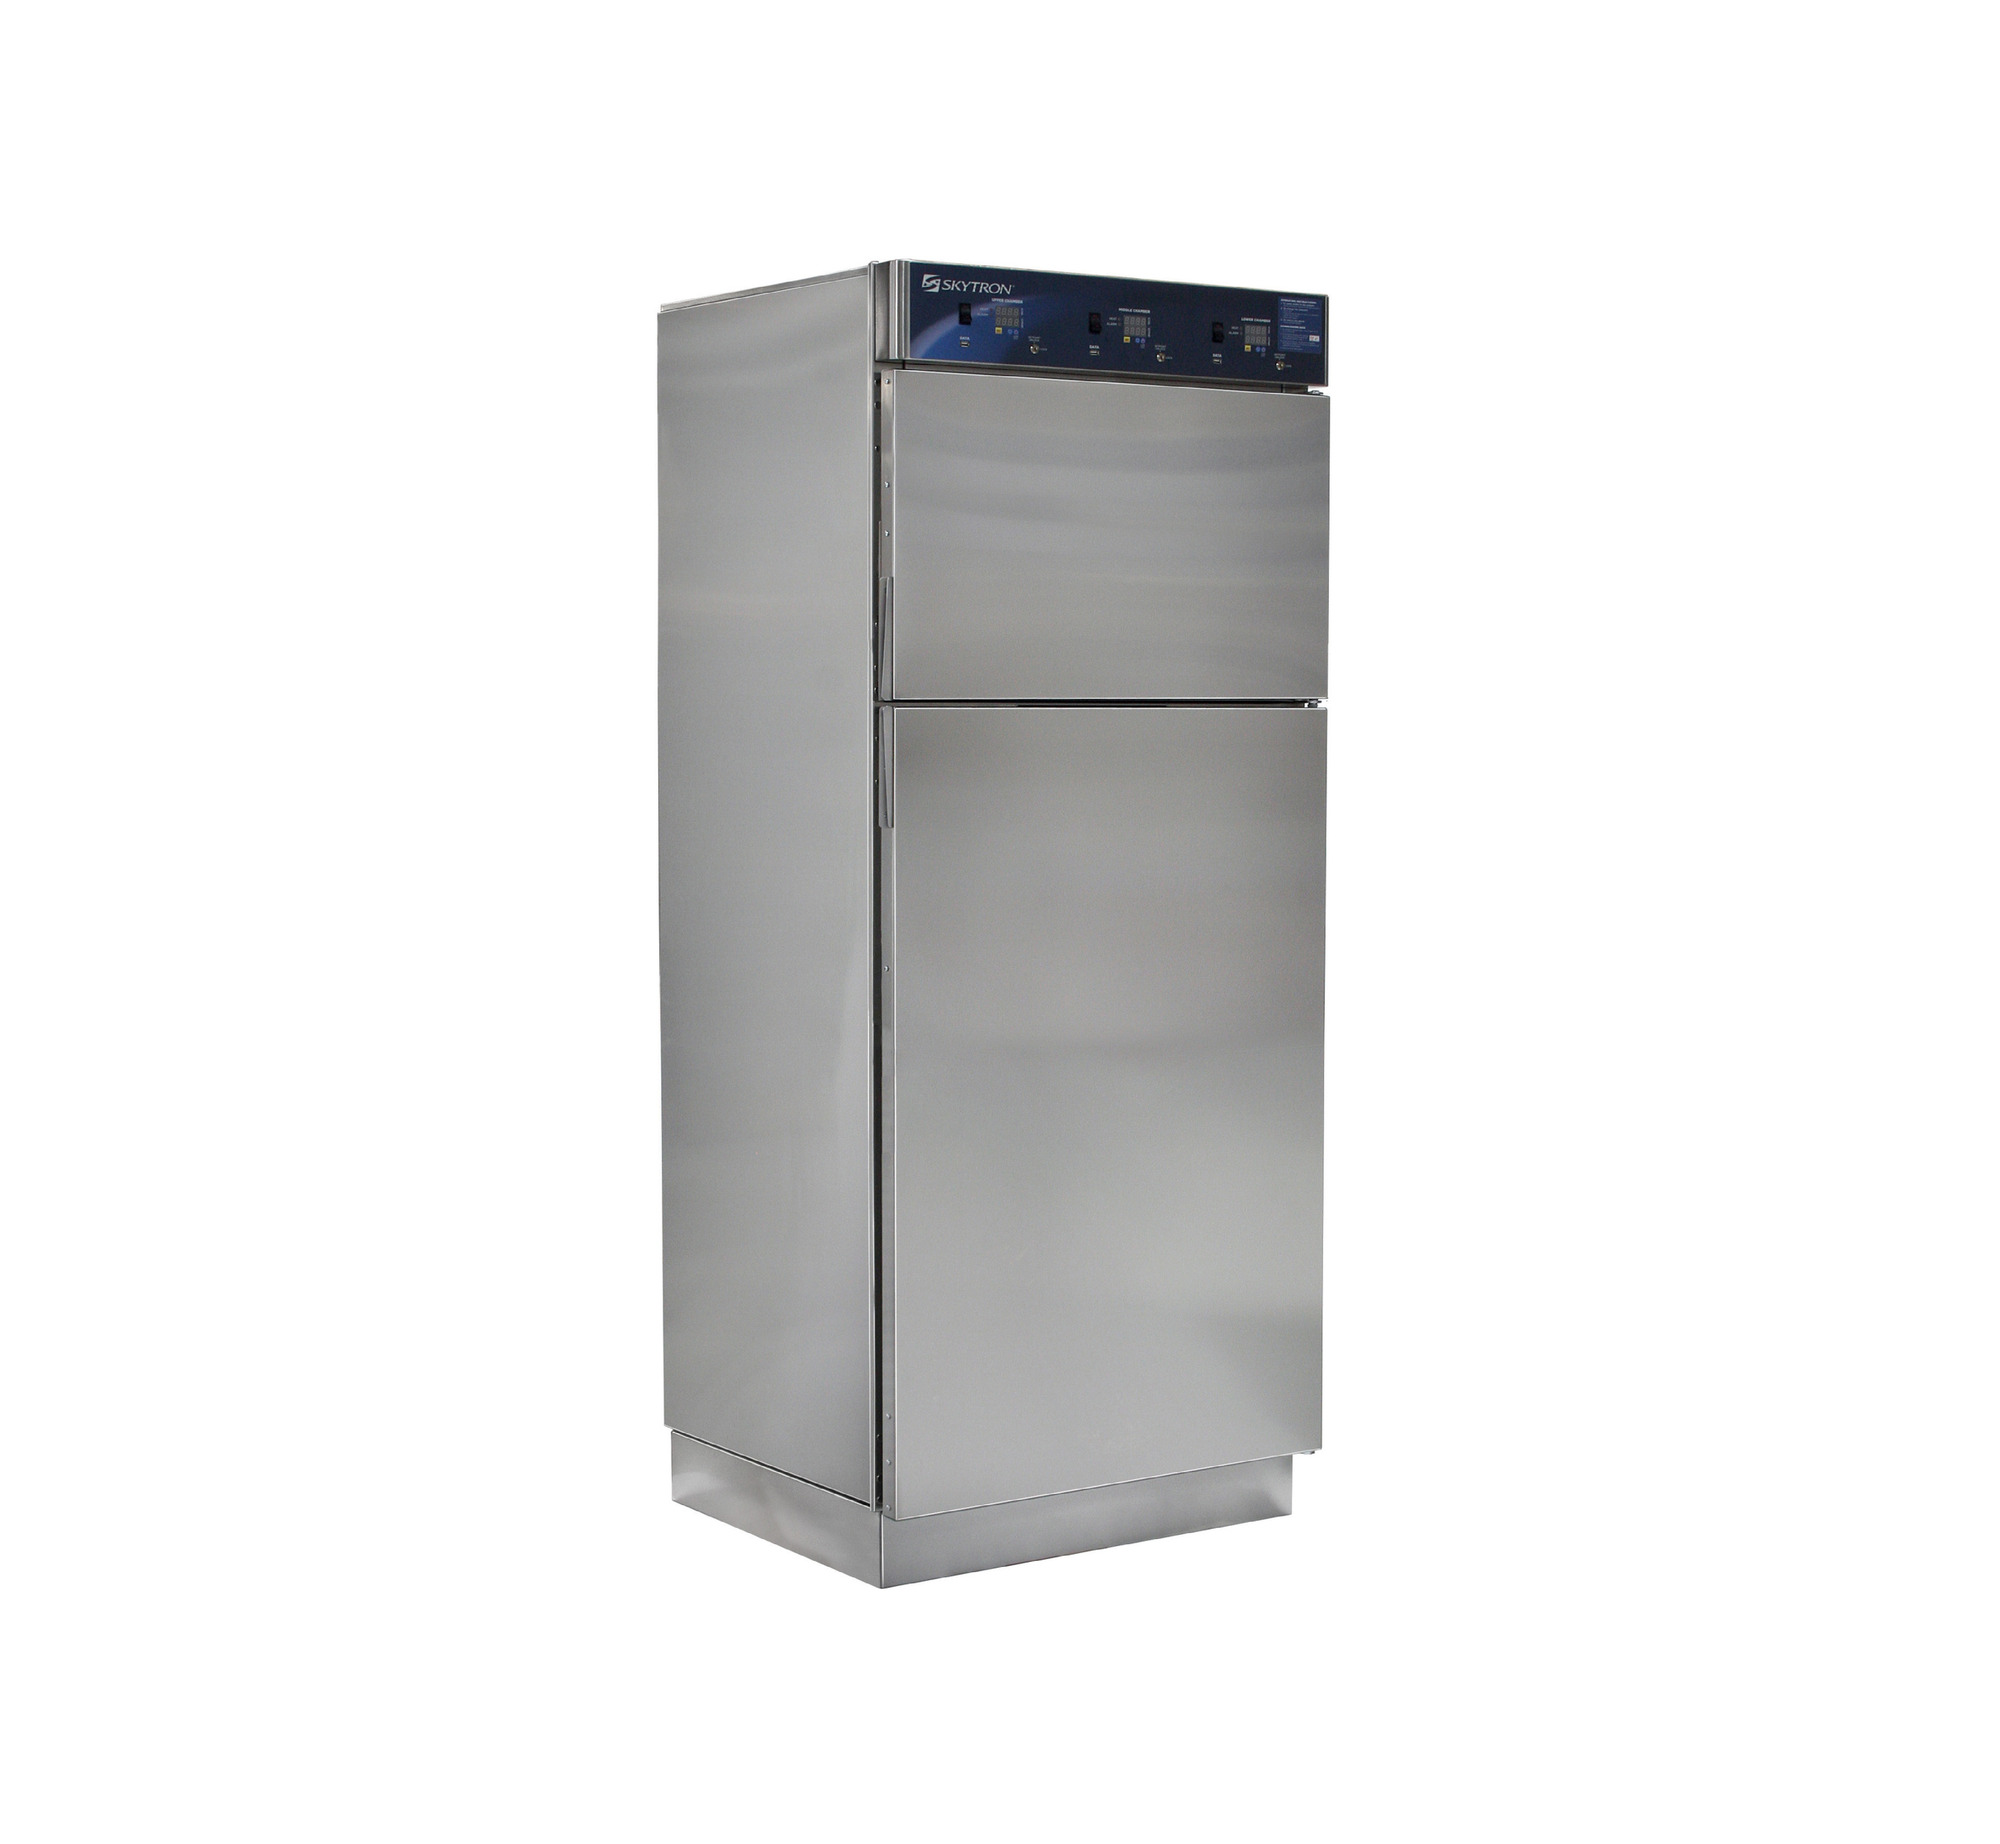 Warming Cabinet dual compartment, three shelves with stainless steel doors